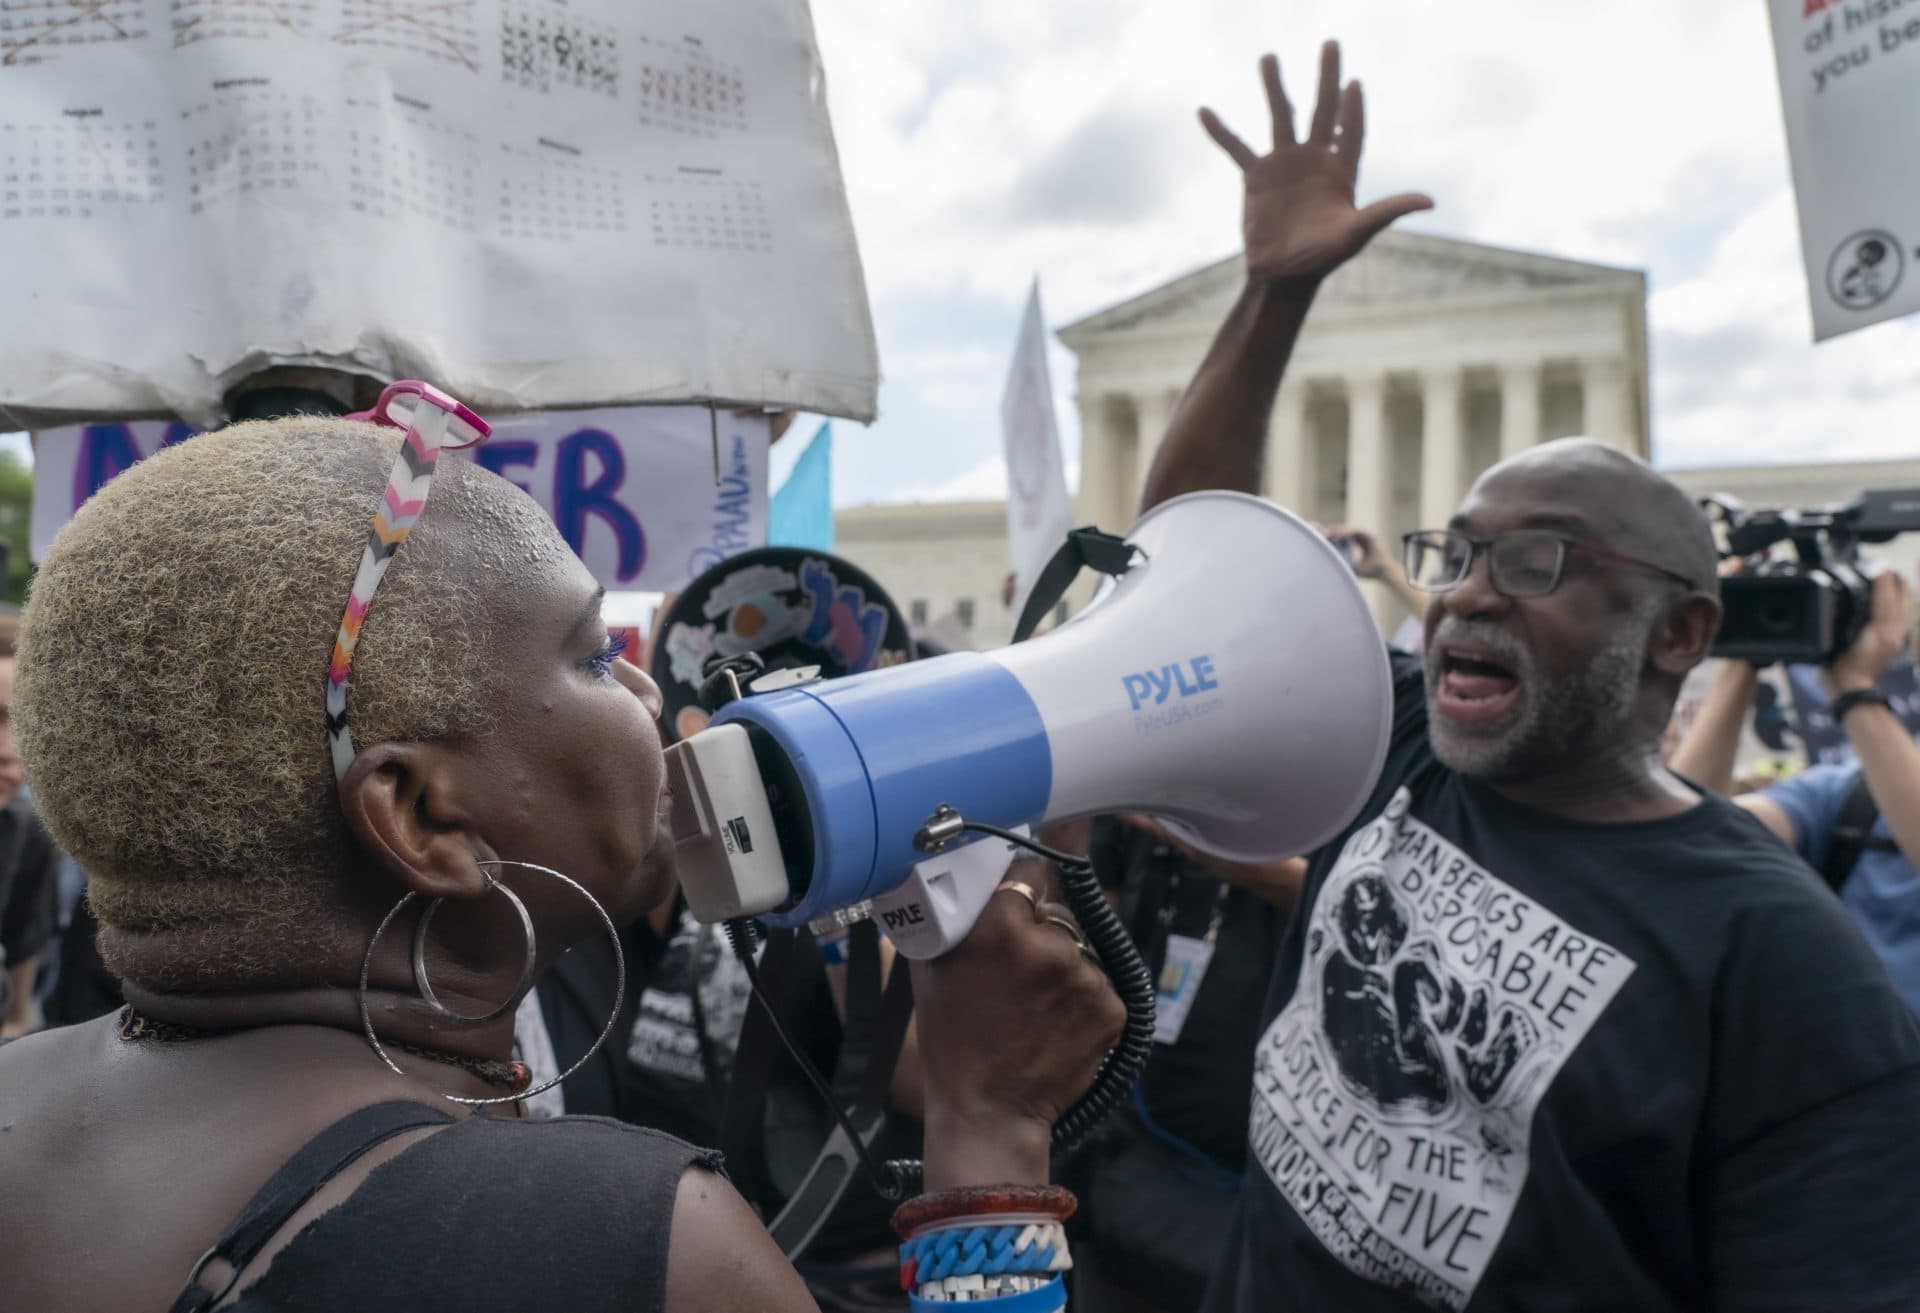 An abortion-rights protester, and an anti-abortion protester face off ahead of the Supreme Court's announcement of its decision to overturn Roe v. Wade. (Gemunu Amarasinghe/AP)